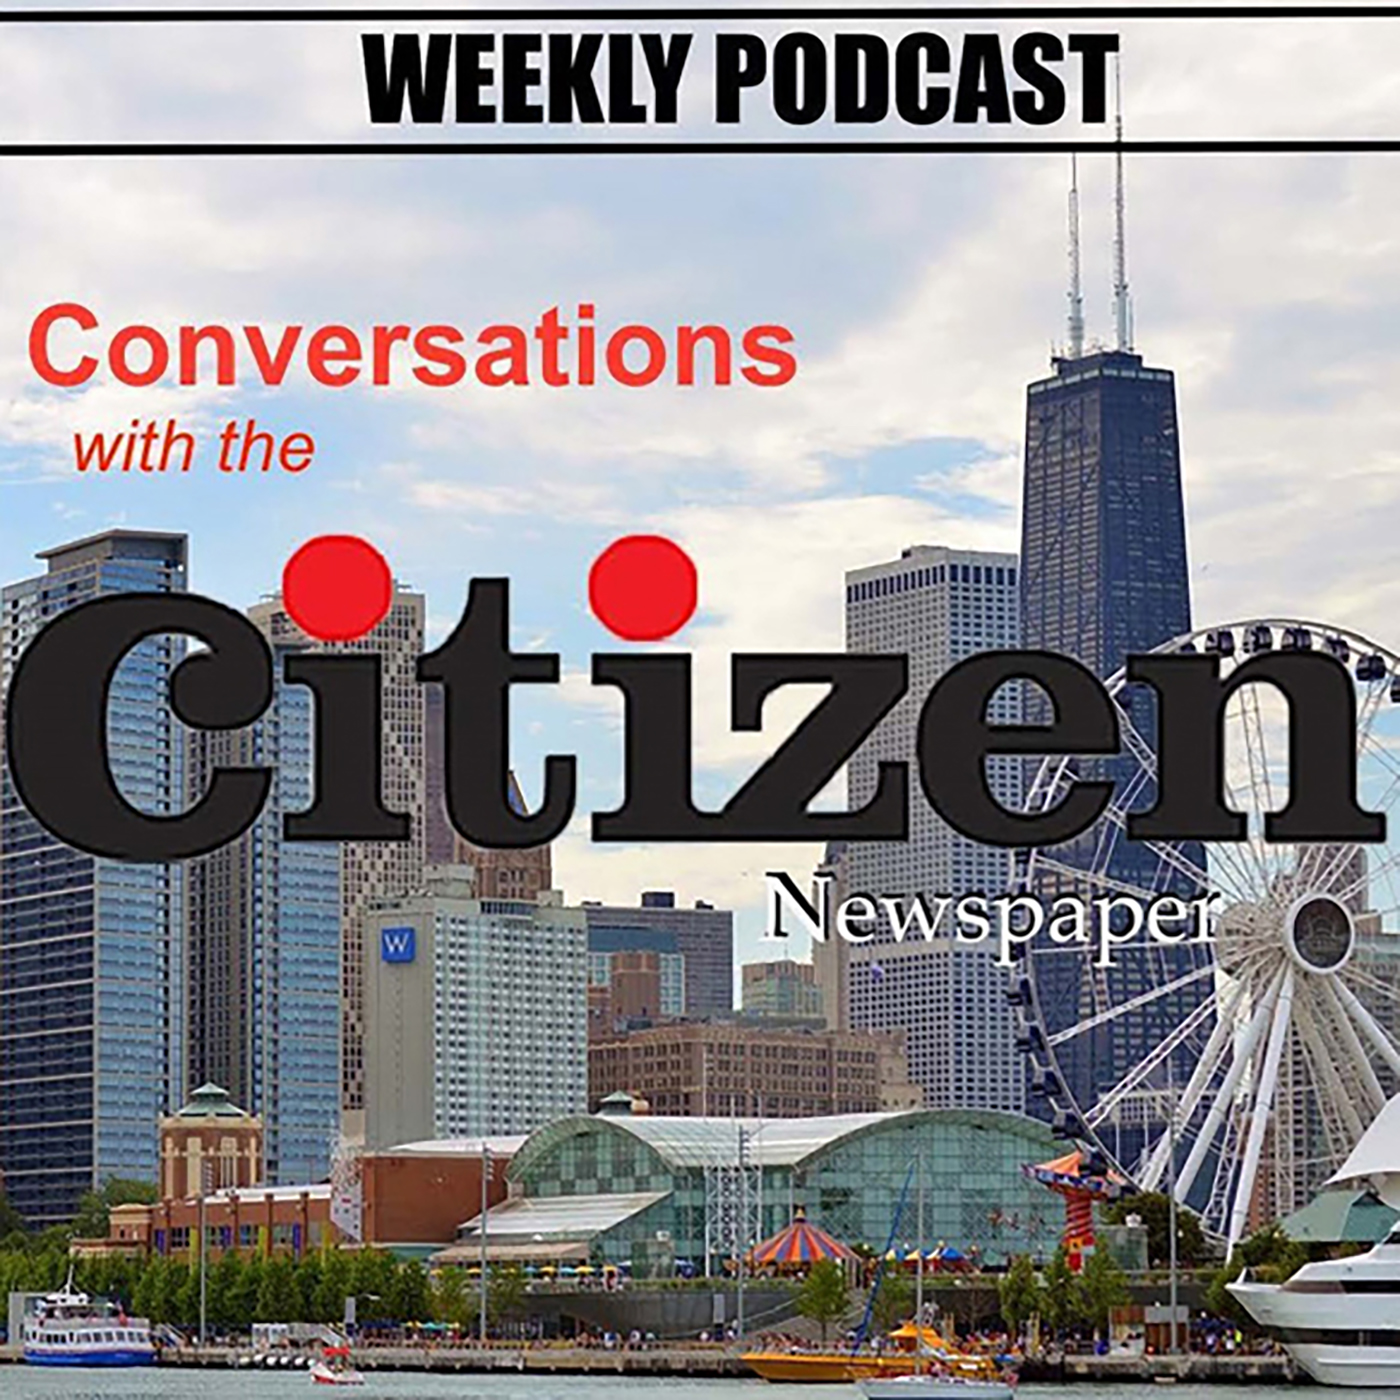 The Citizen Newspaper Group